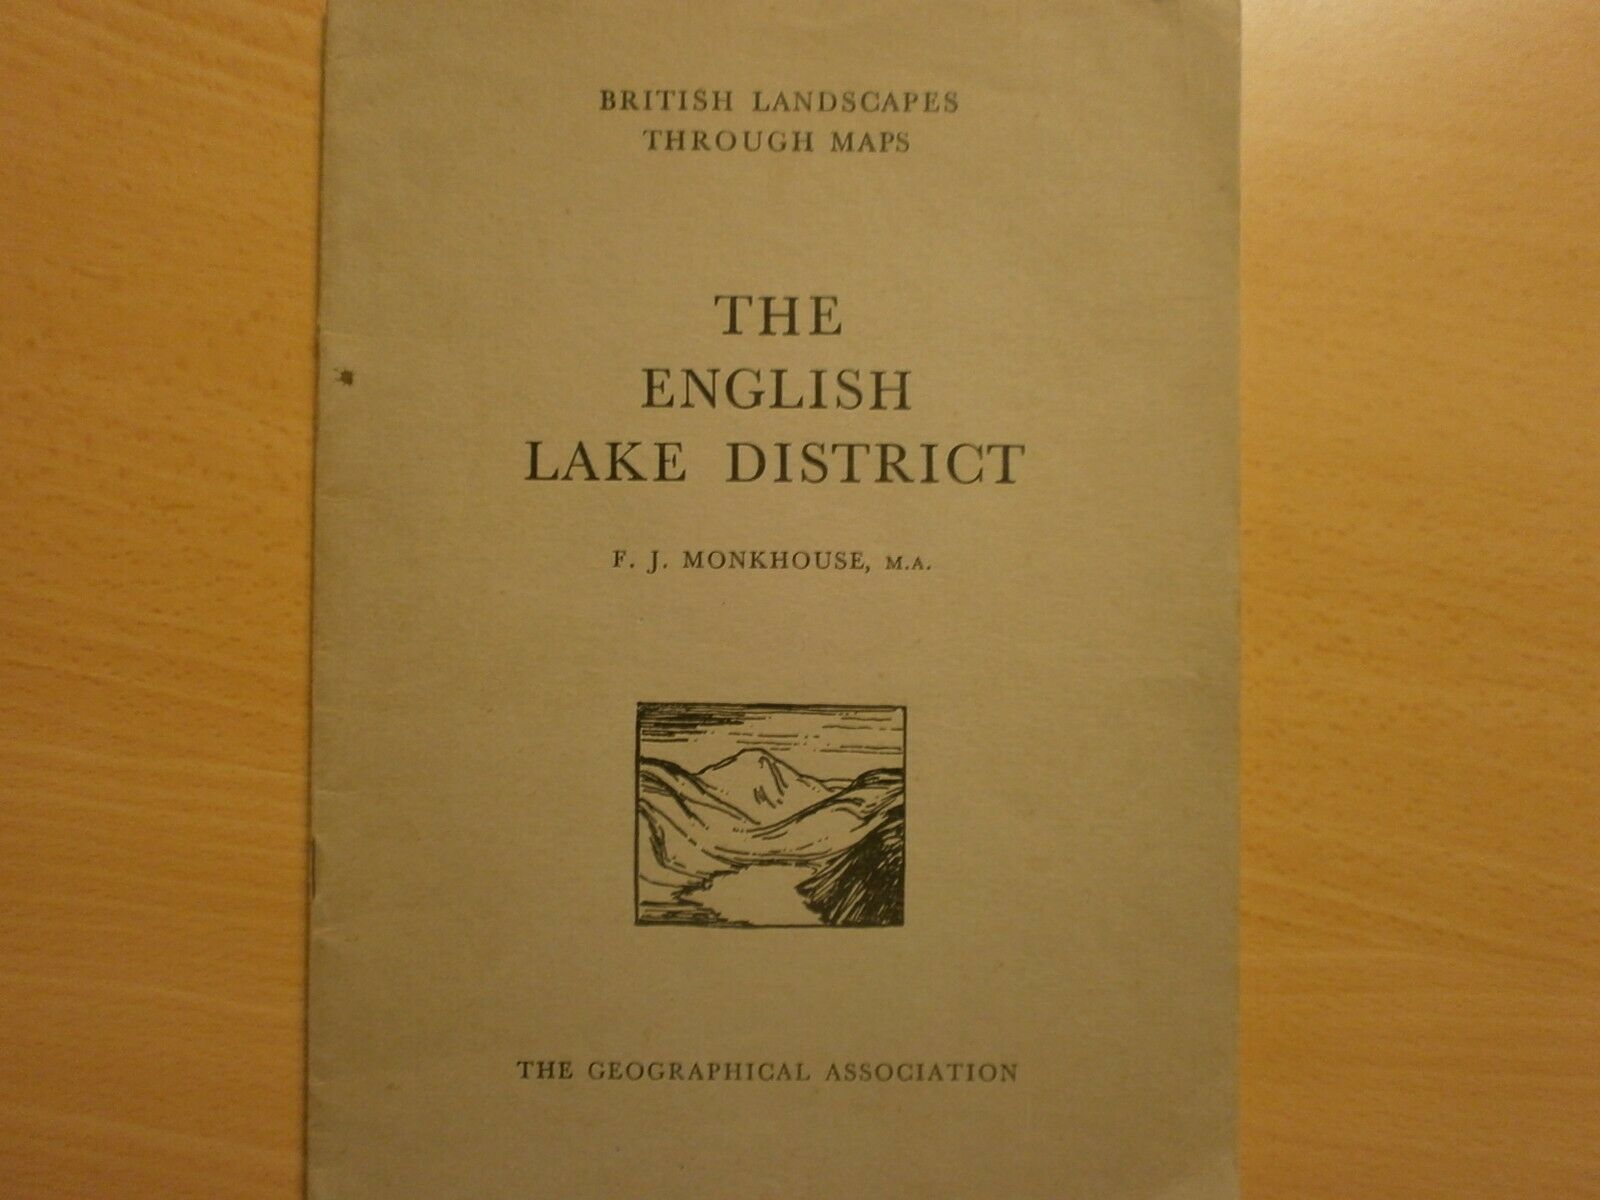 House Clearance - The English lake District, Monkhouse, Vintage booklet, geographical association